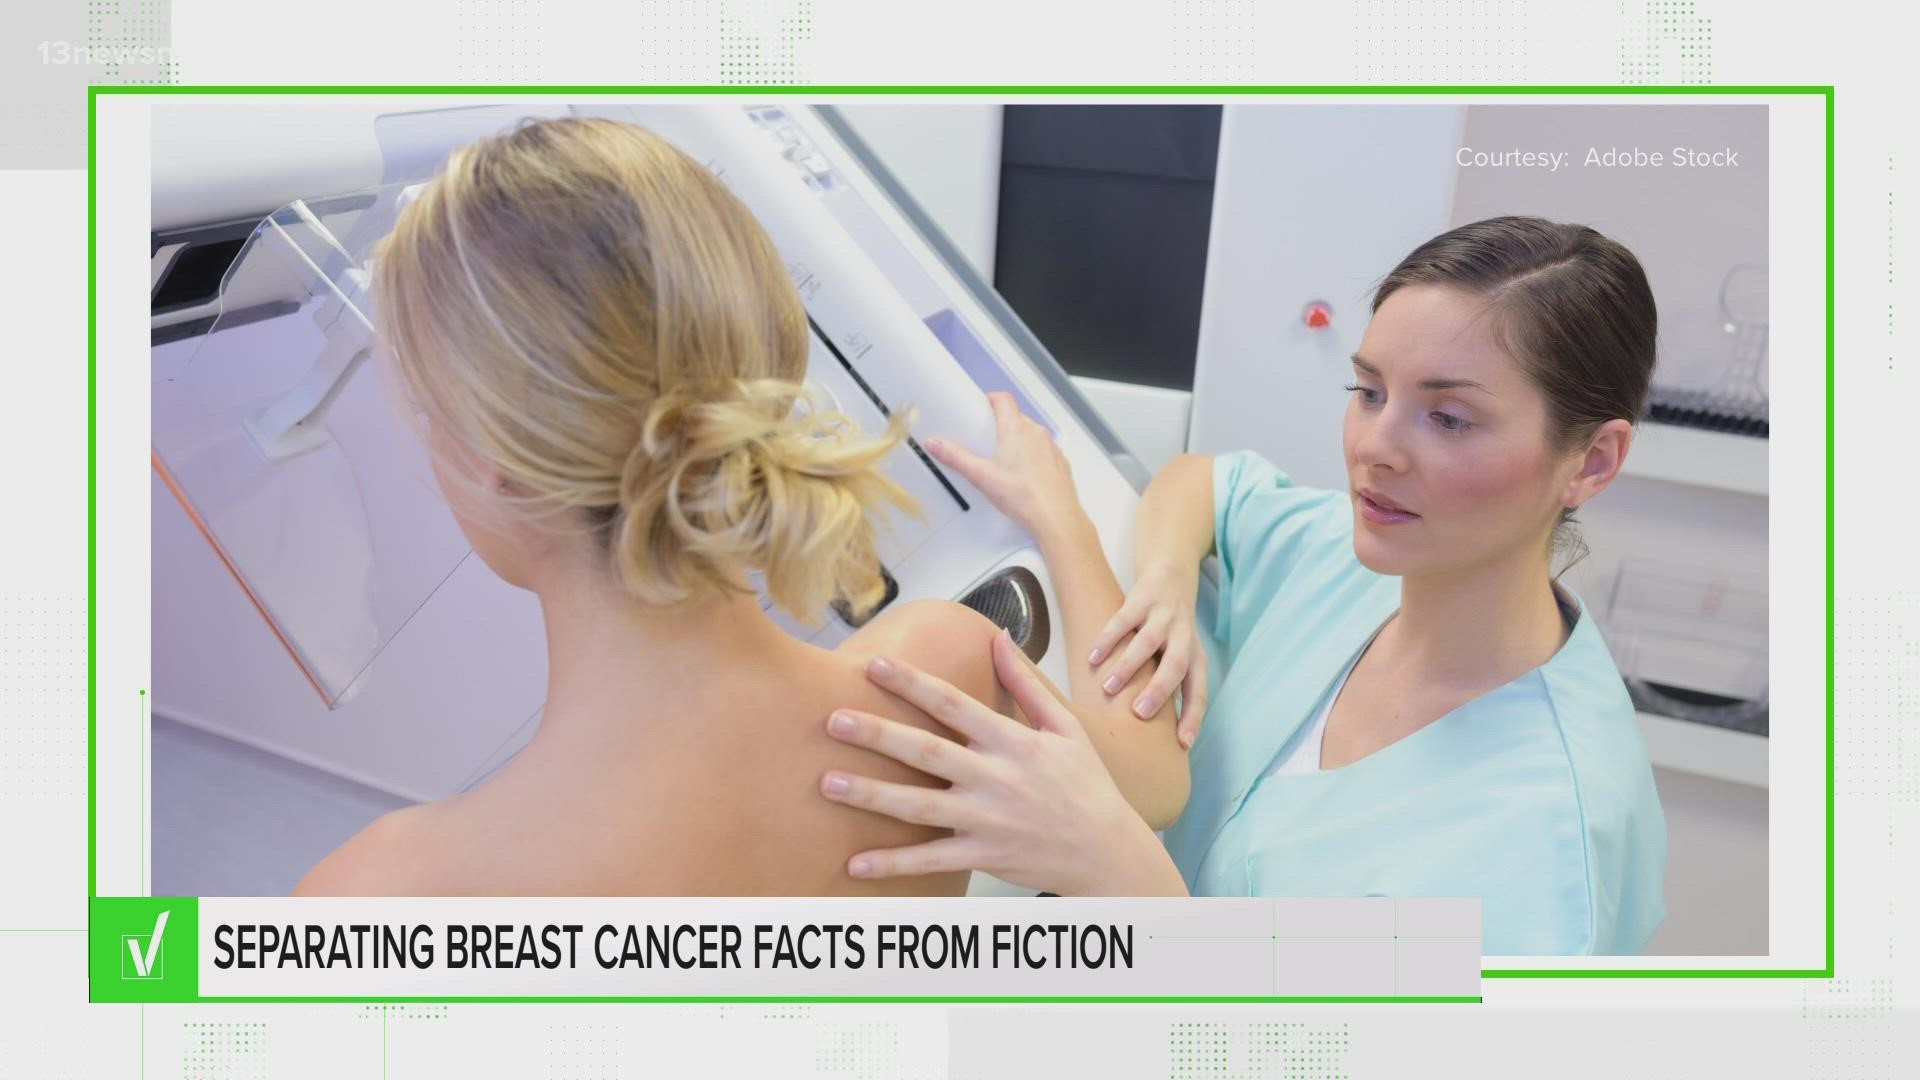 October is Breast Cancer Awareness Month, and part of that means being aware of myths, misconceptions, and false viral claims about the disease and detection of it.